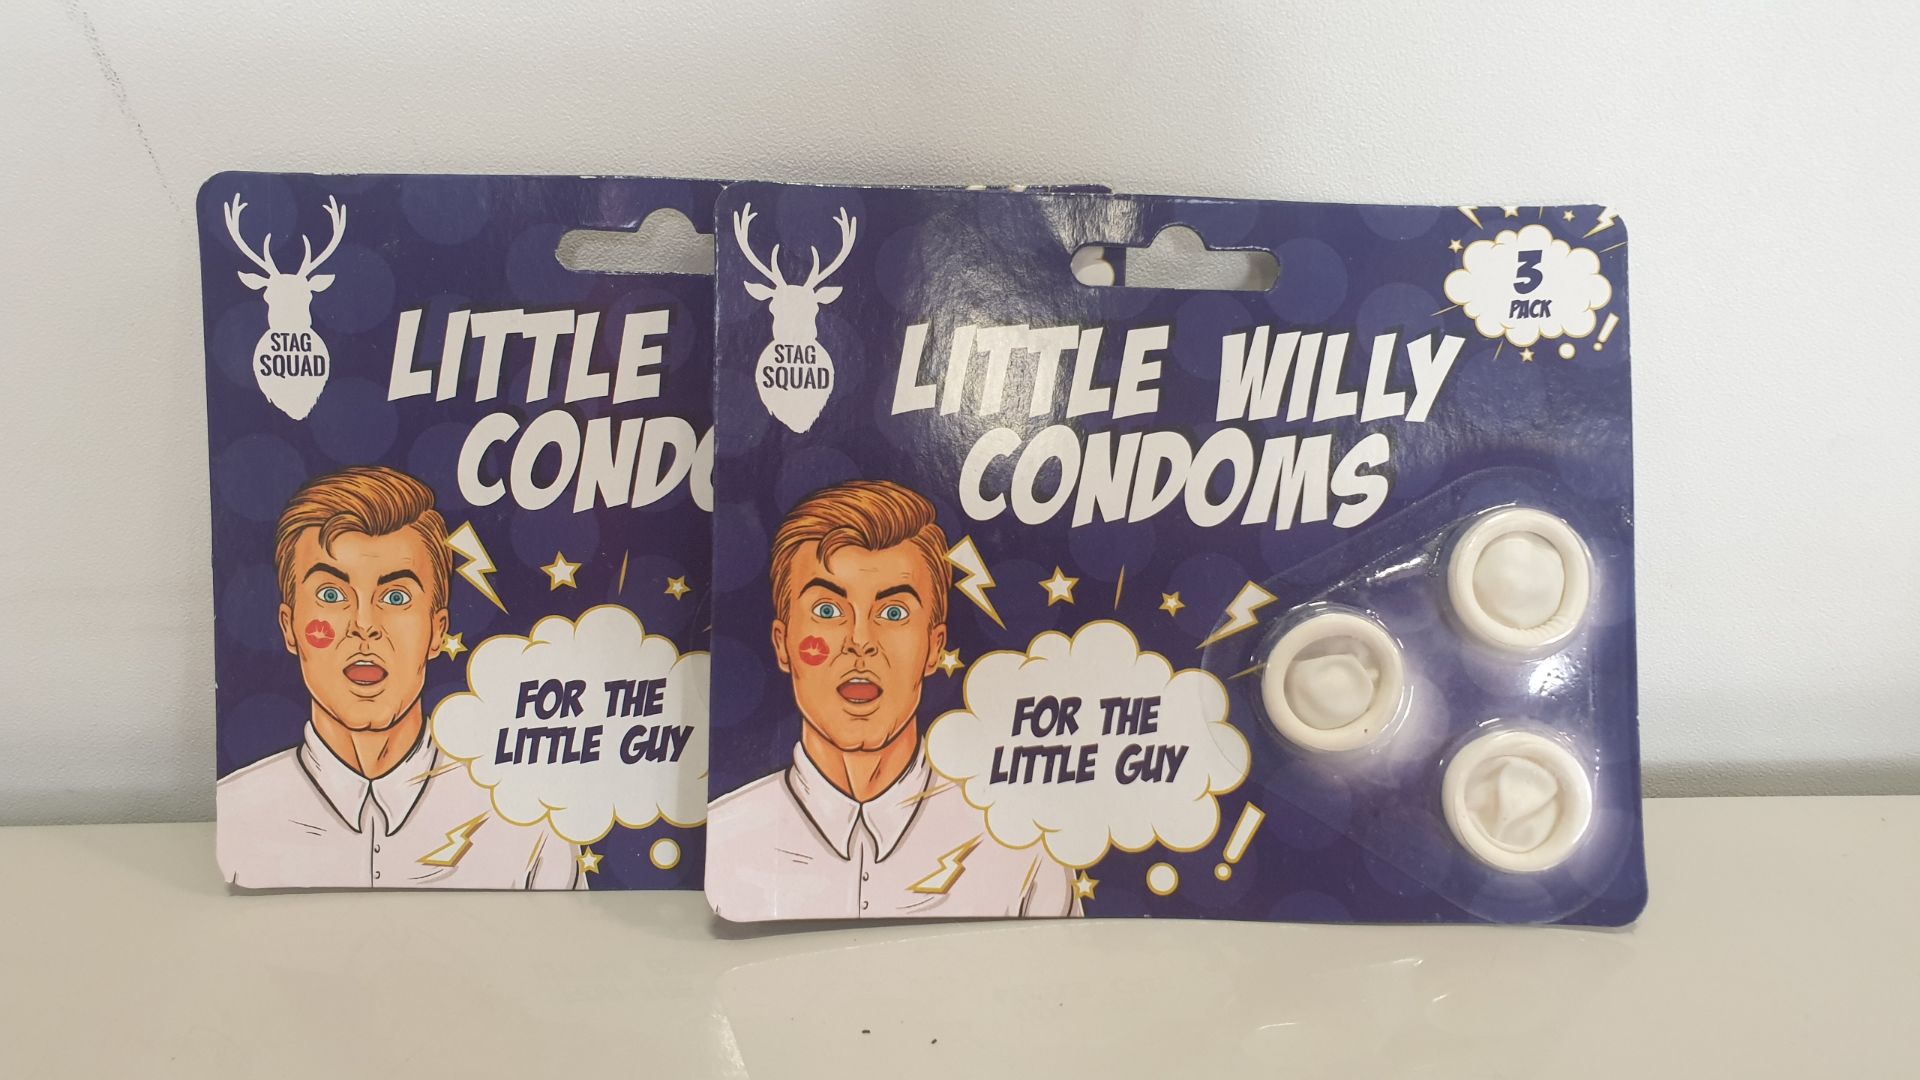 288 X LITTLE WILLY CONDOMS - IN 12 CARTONS OF 24 PCS